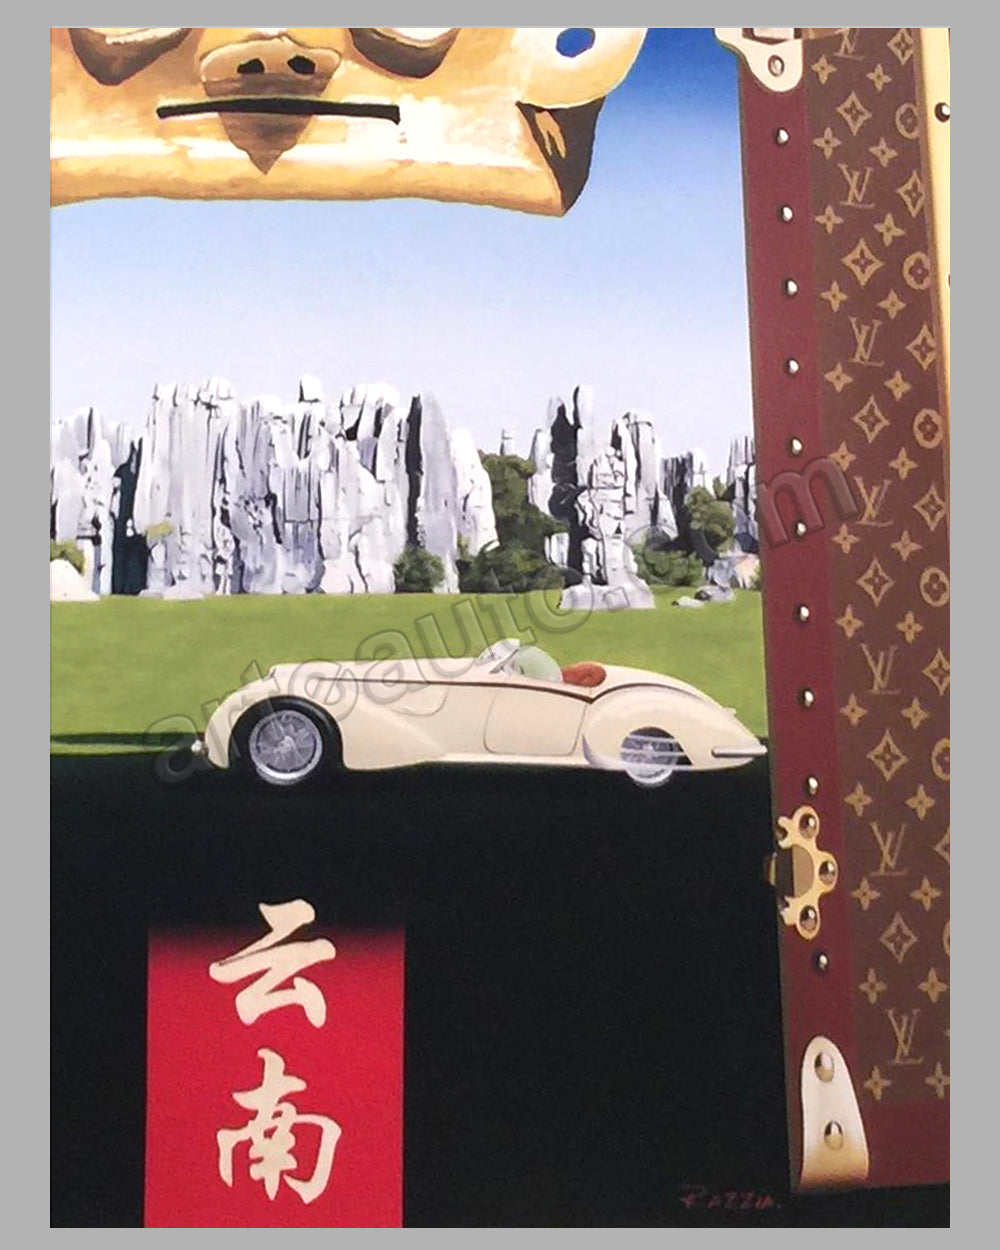 The large Louis Vuitton Boheme Run Poster handsigned by Razzia